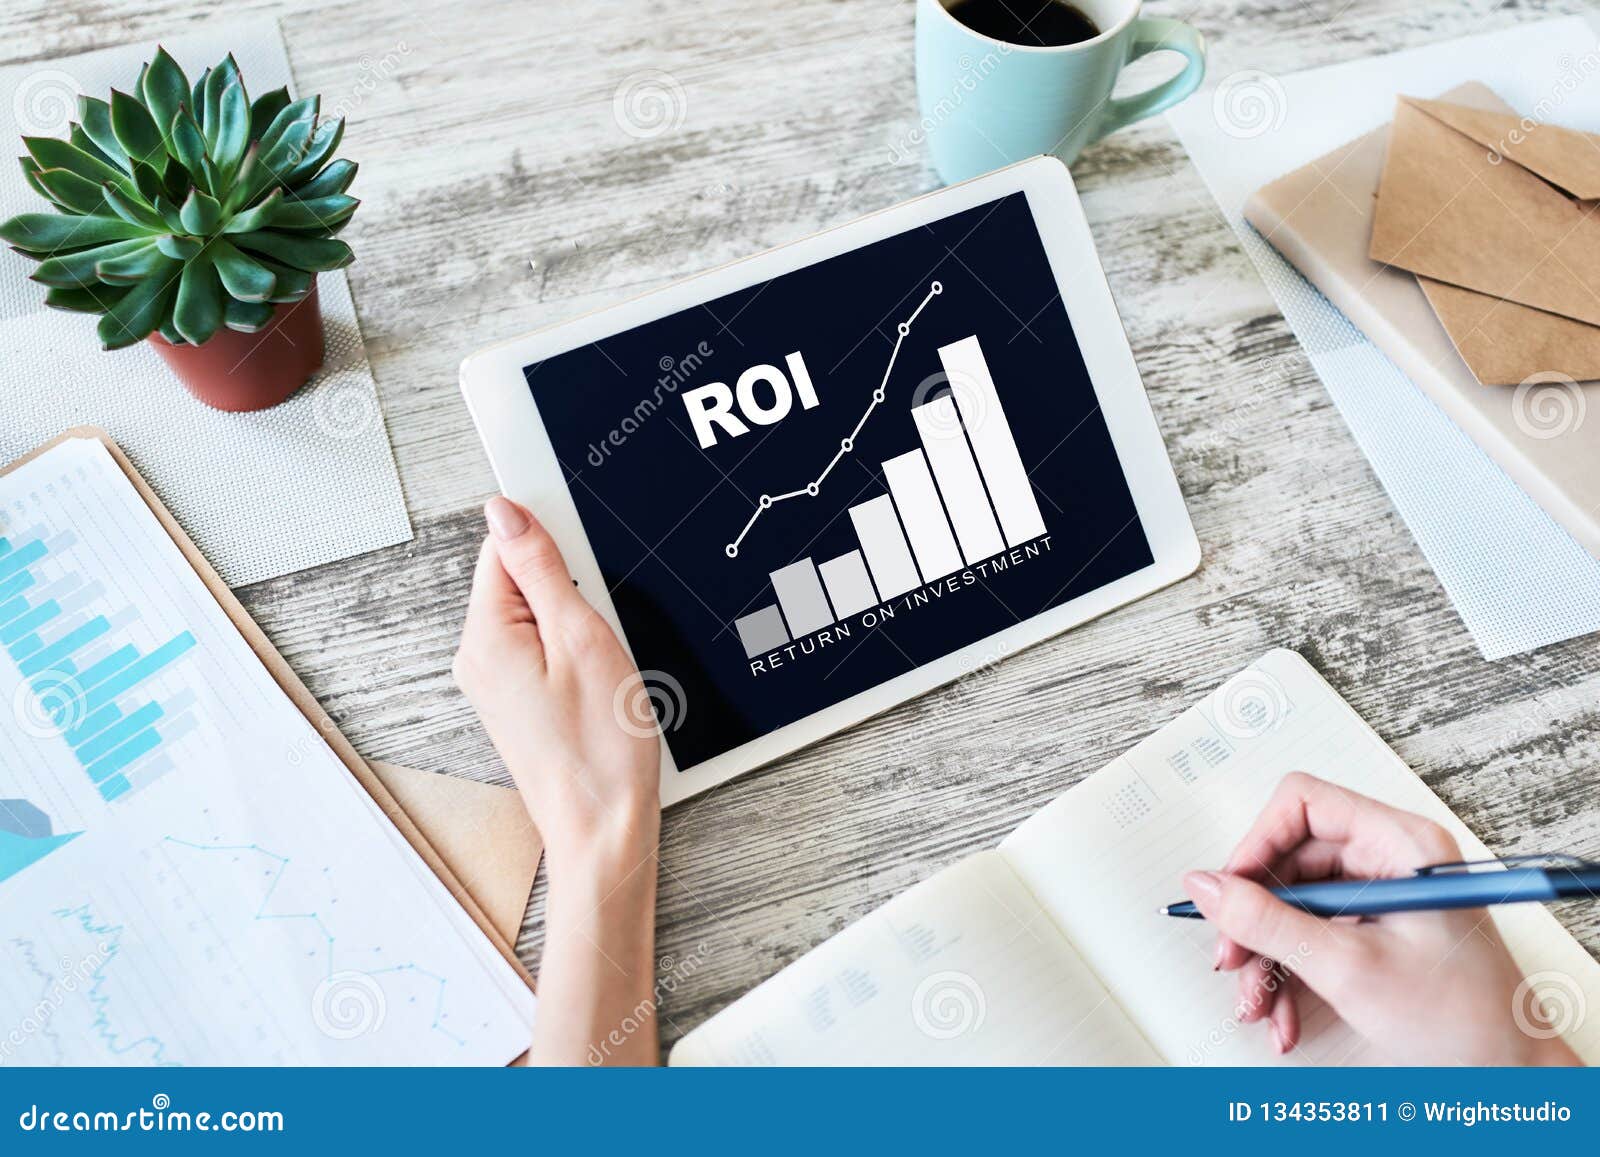 roi, return on investment, business and financial concept.